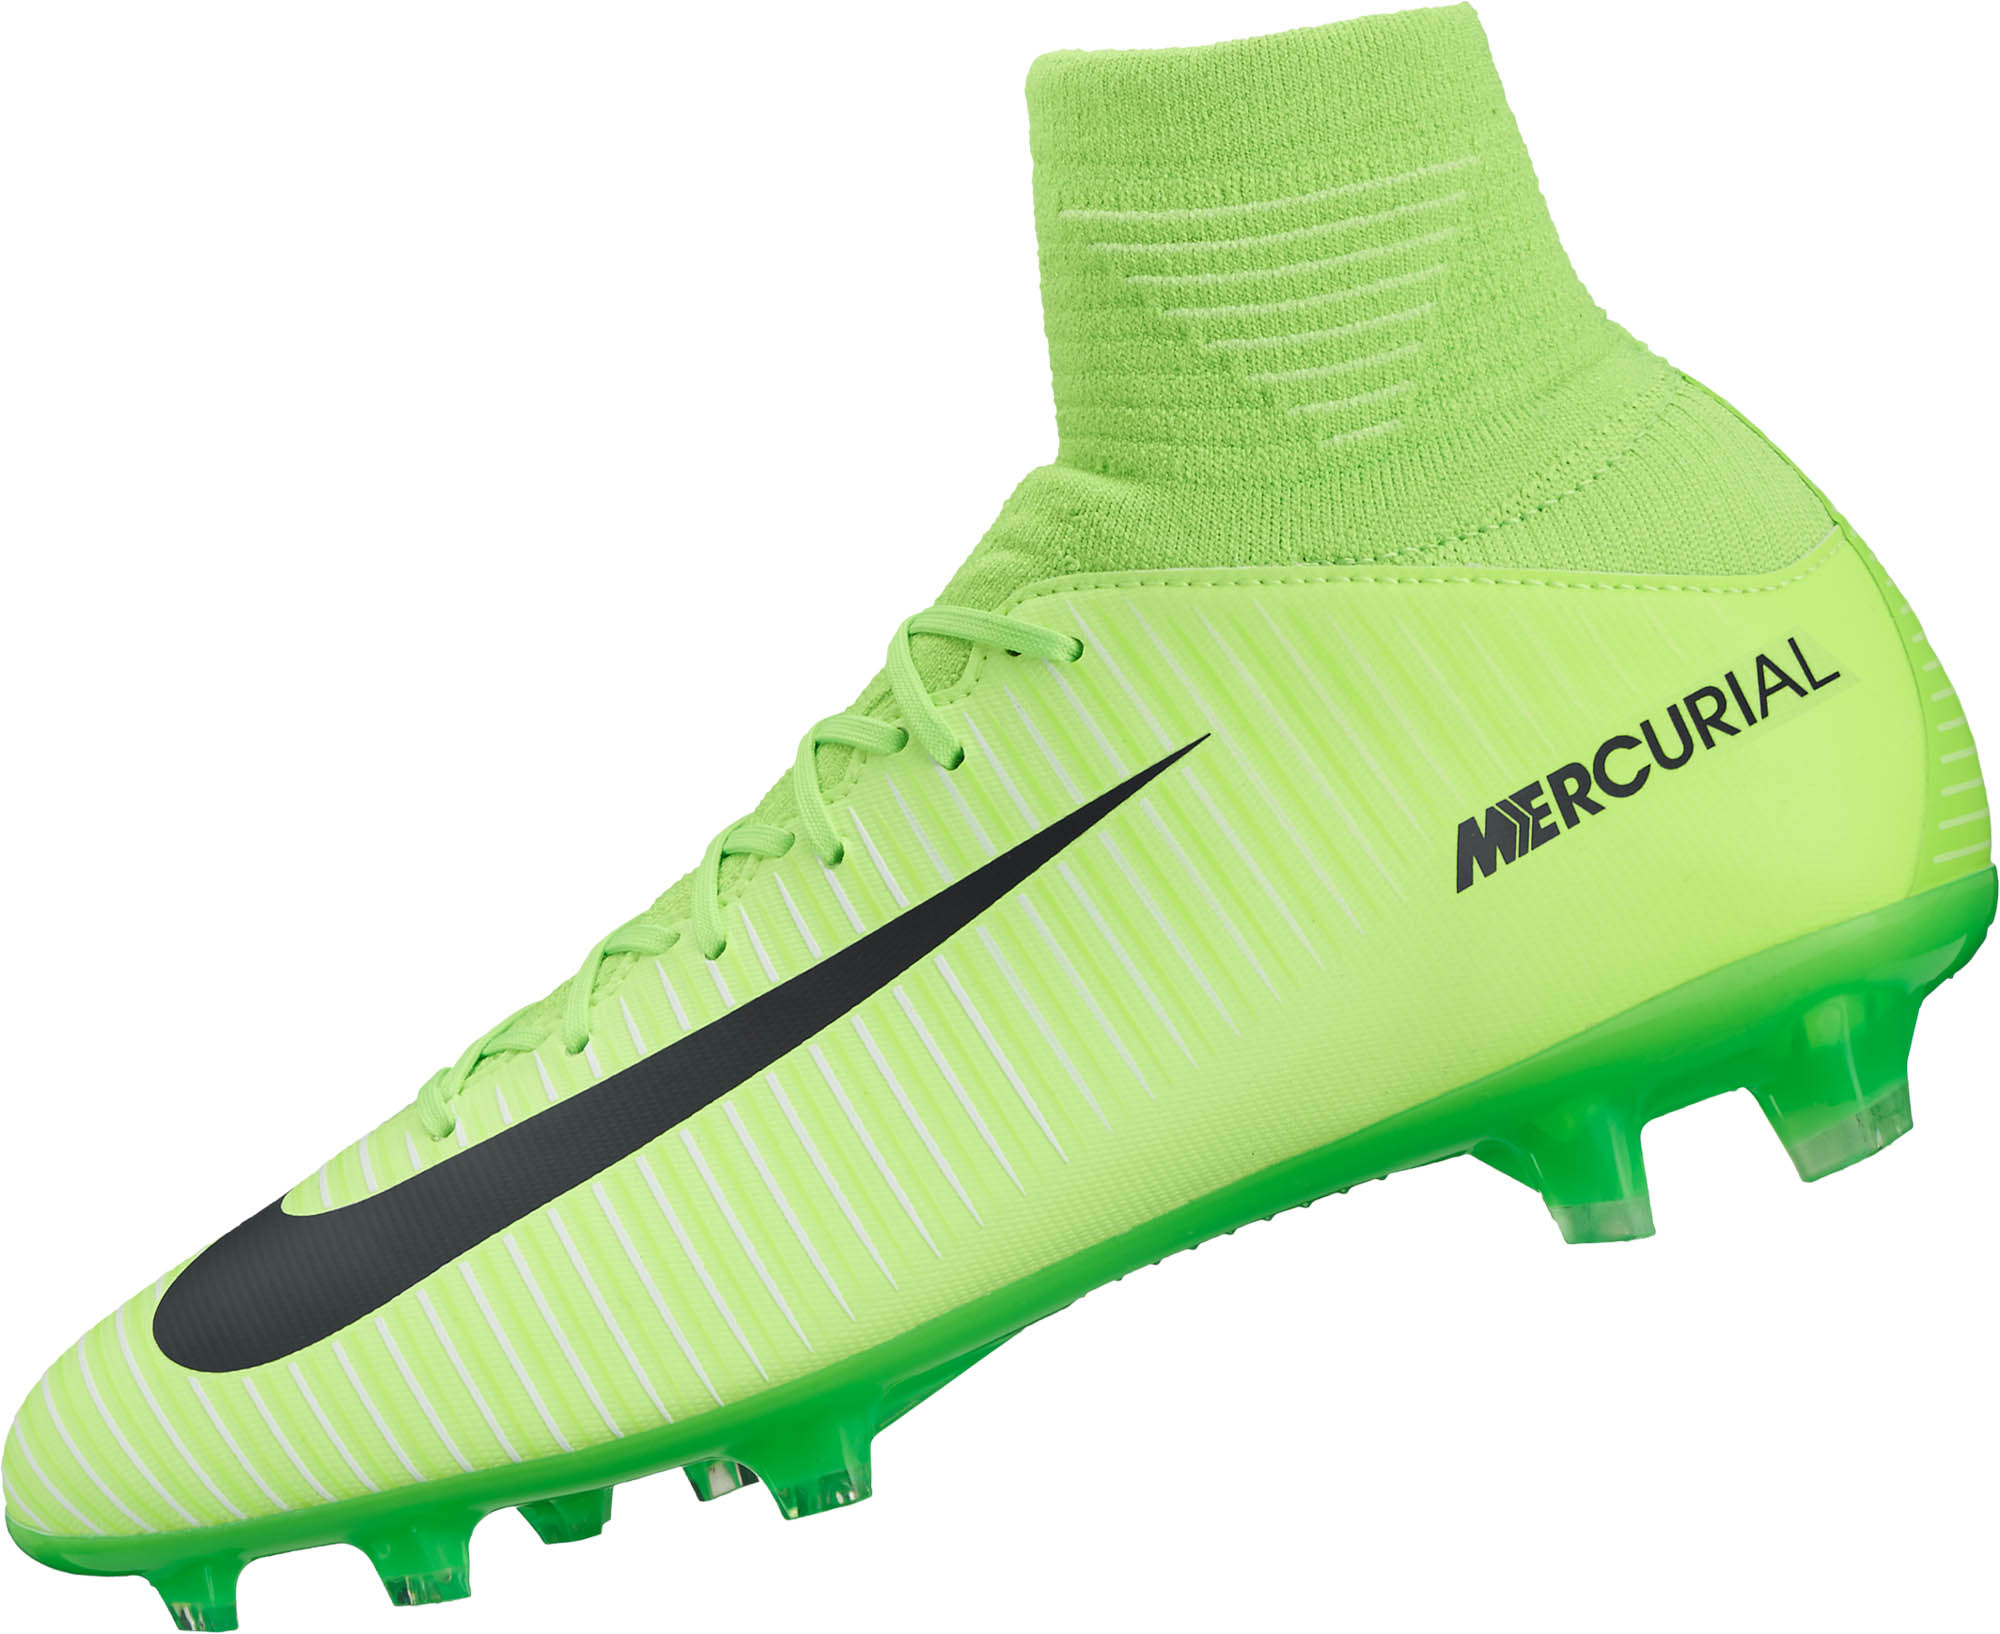 nike mercurial superfly lime green